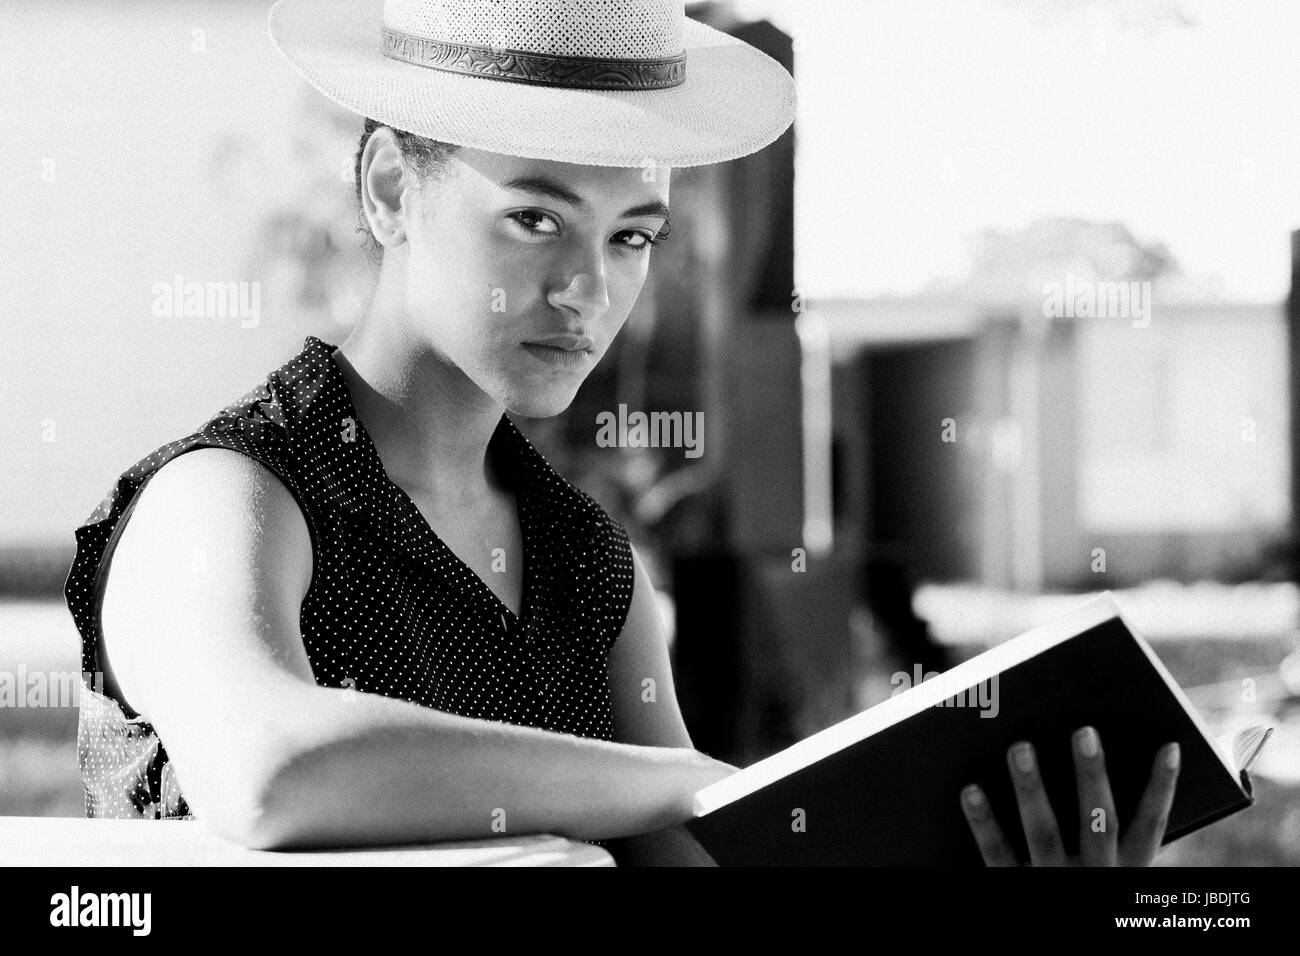 Young woman intellectual Black and White Stock Photos & Images - Alamy